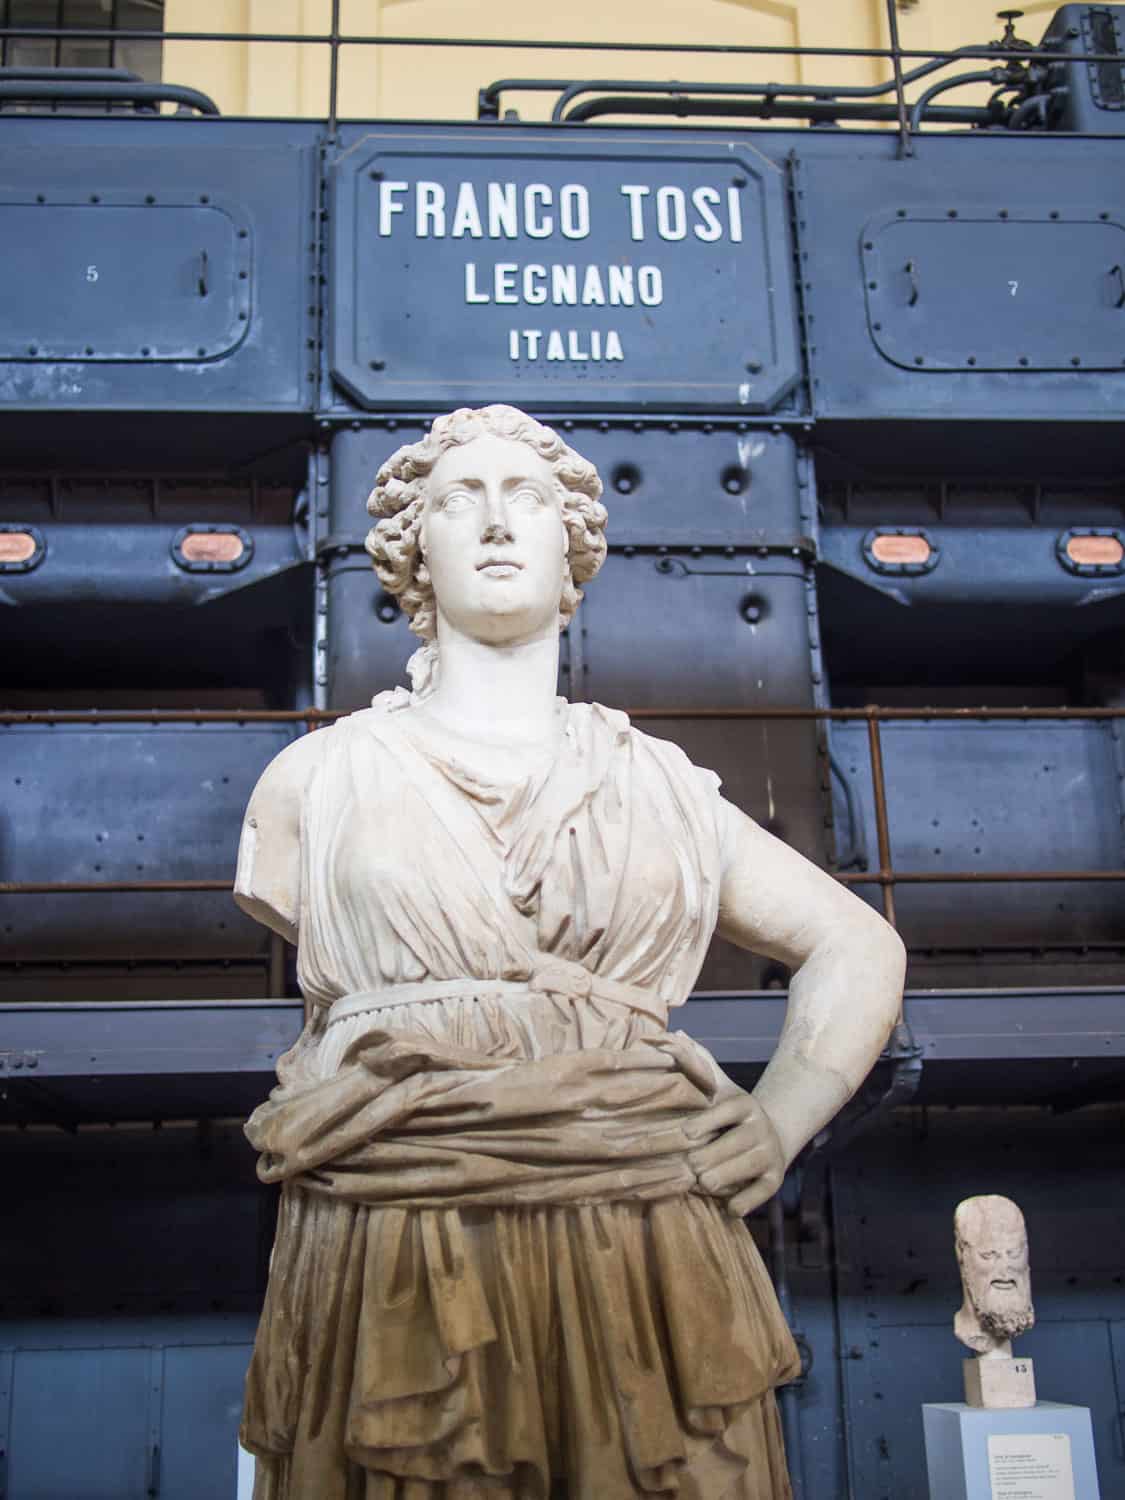 Sculpture in front of an industrial machine in Centrale Montemartini museum in Ostiense, Rome, Italy